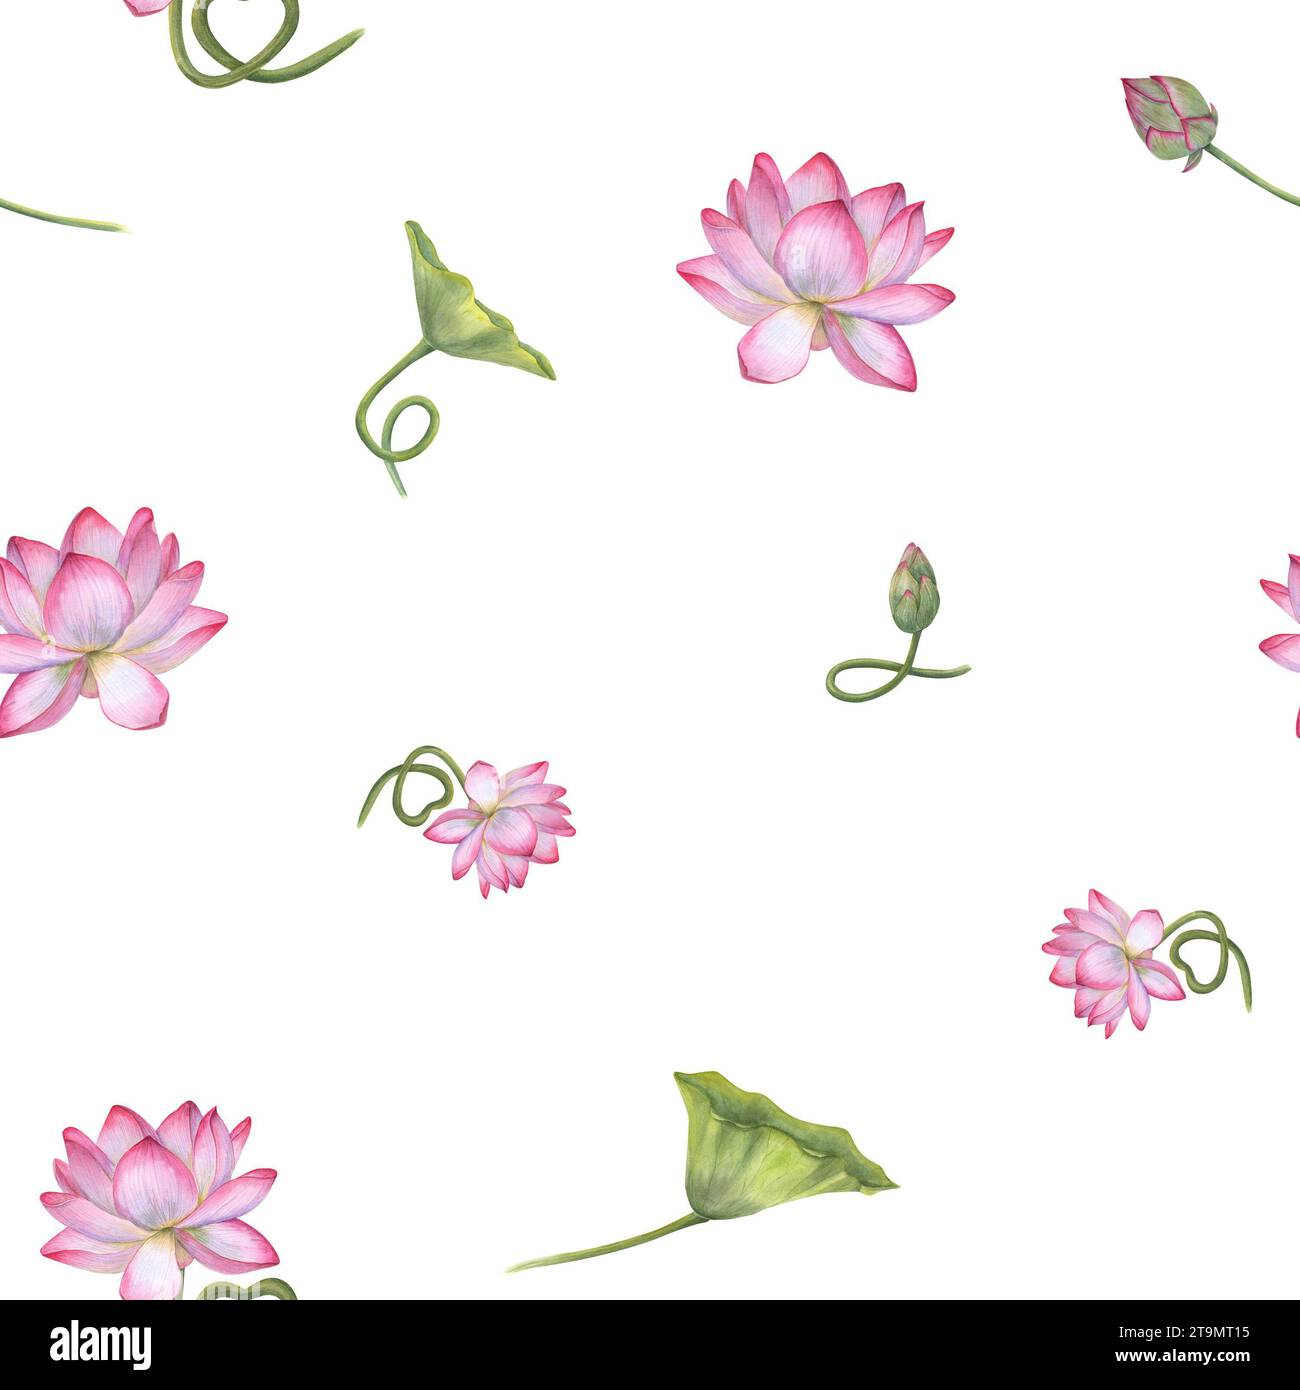 Ornate with white pink lotus flowers, green leaves. Seamless pattern of blooming water lily. Watercolor illustration isolated on white. Stock Photo